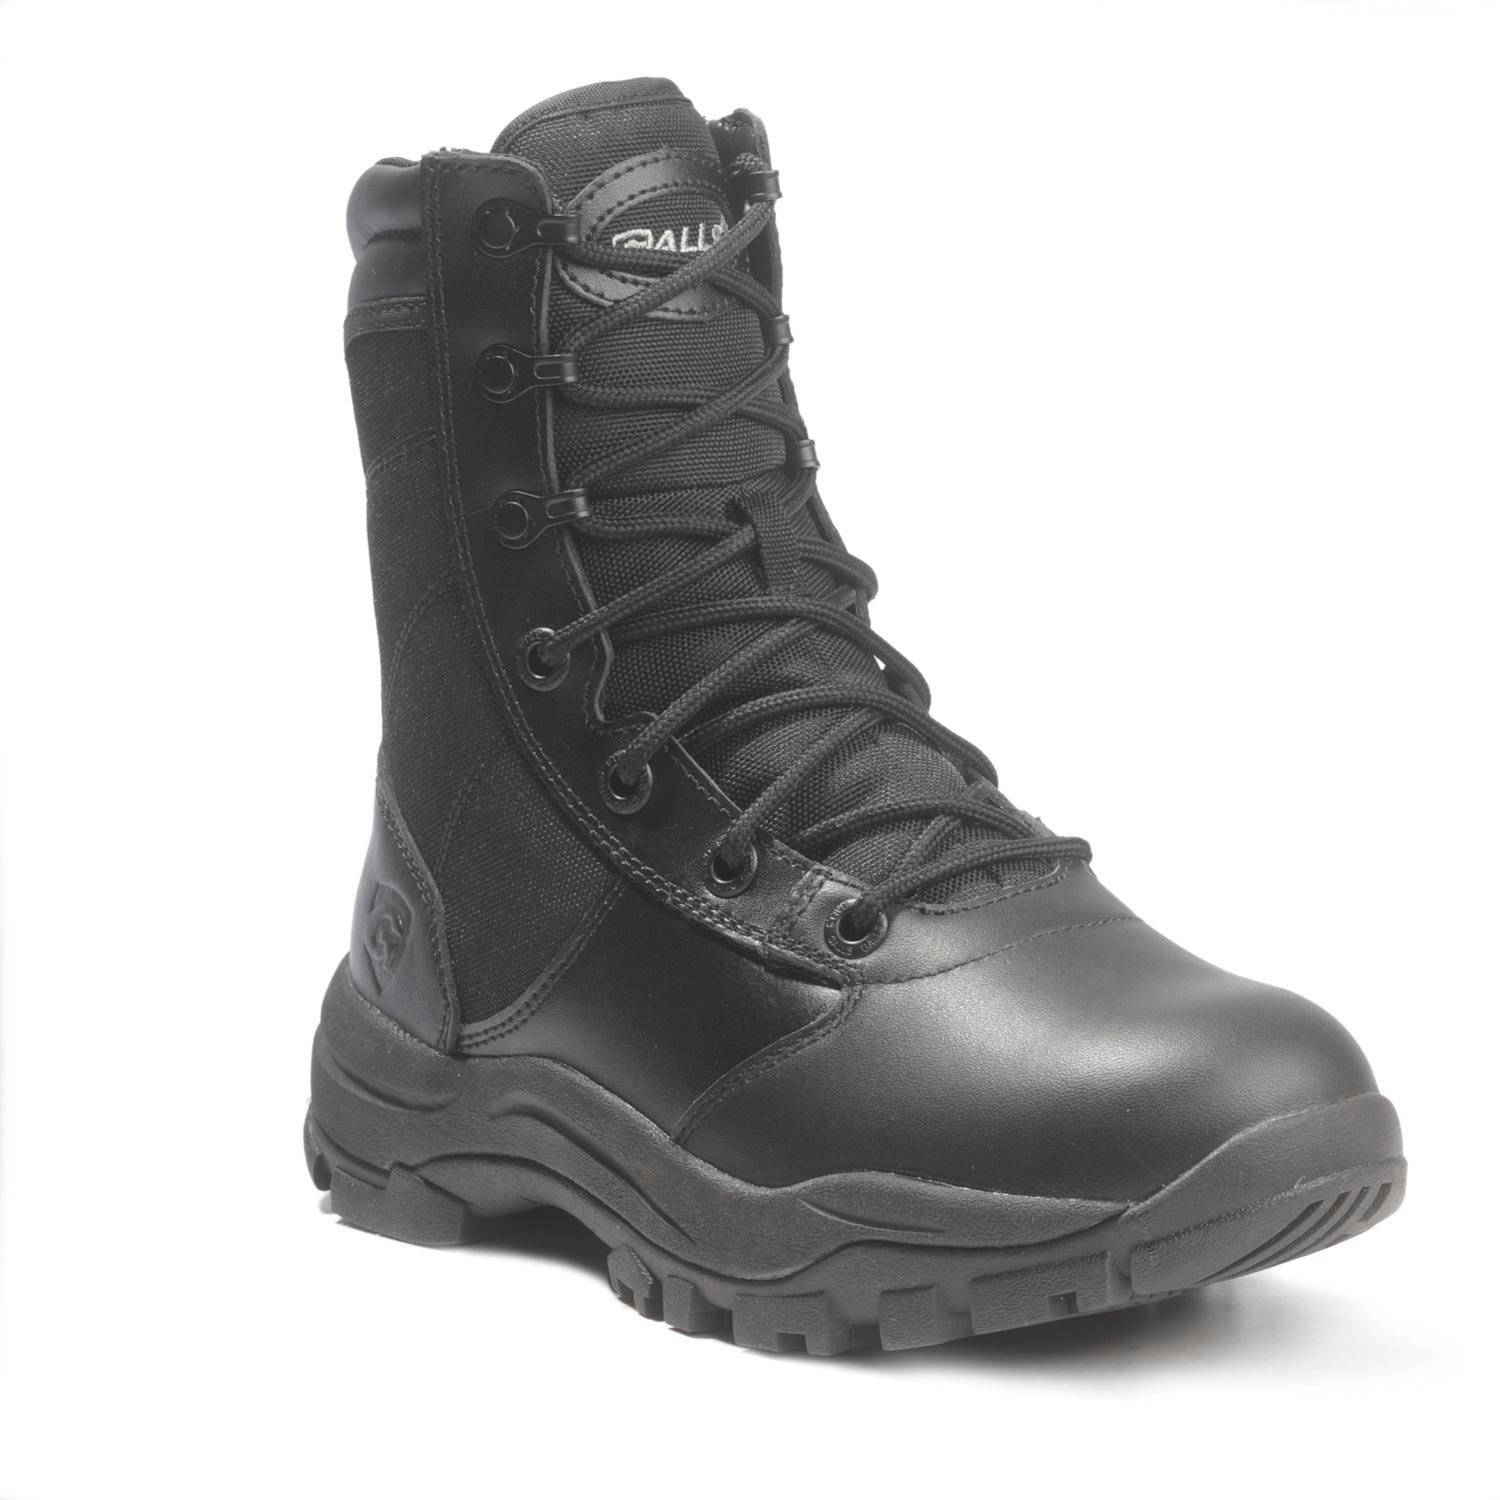 Women's Military & Tactical Boots